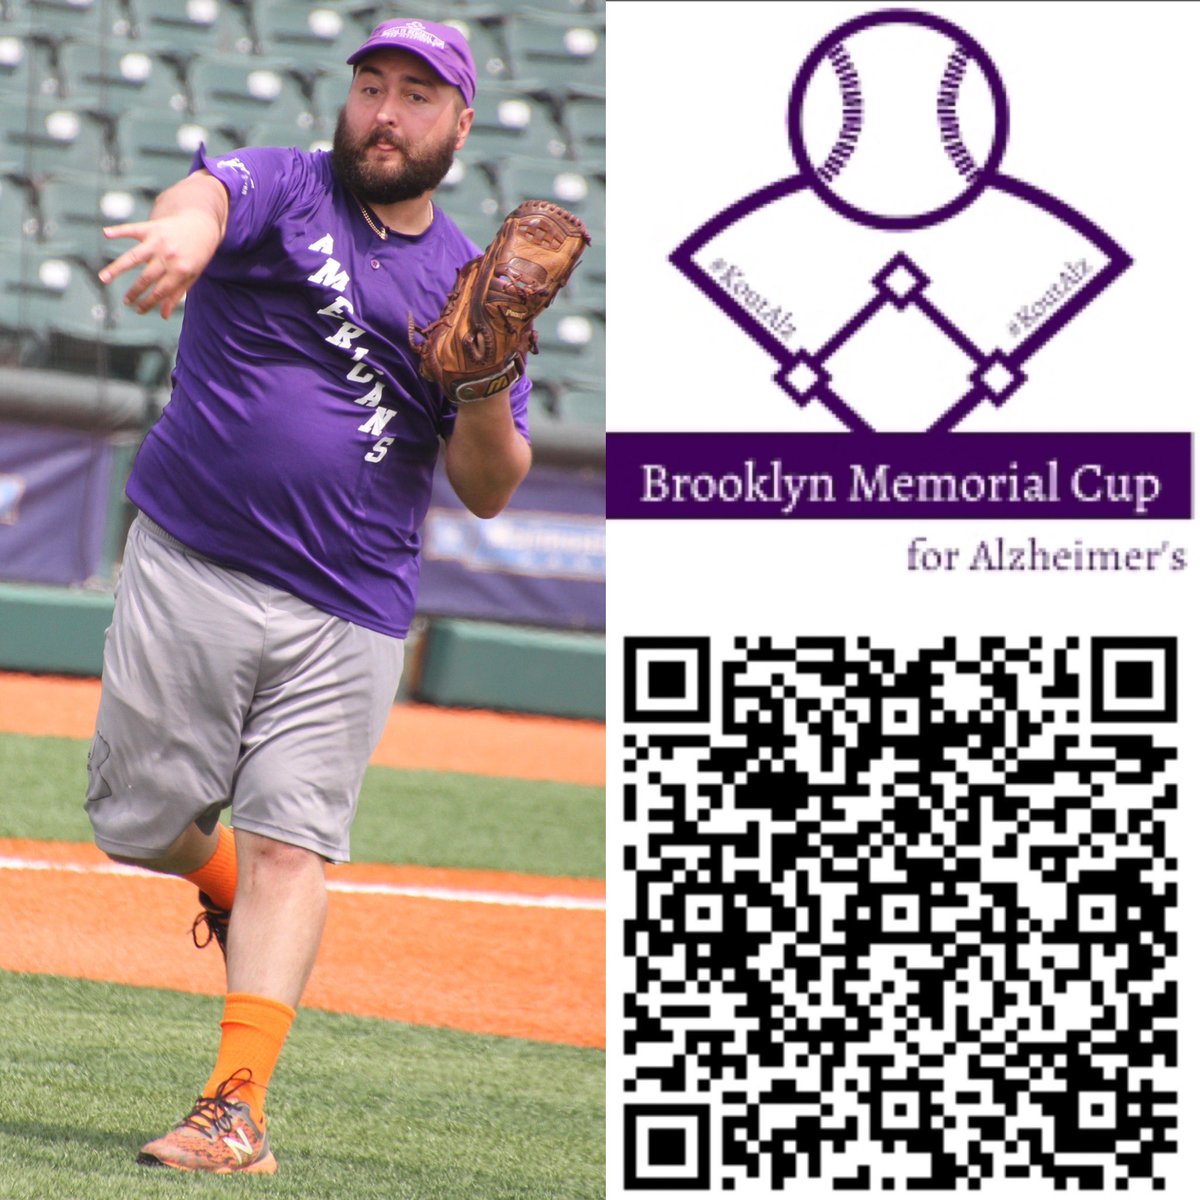 He’s BACK! The reigning, defending, @BKMemorialCup 2023 Morton Blittner Game MVP, @RedVykingGaming has re-upped with The #BKAmericans! Please help us reach our $12K goal: act.alz.org/goto/BrooklynM… #KoutAlz #ENDALZ #TheLongestDay